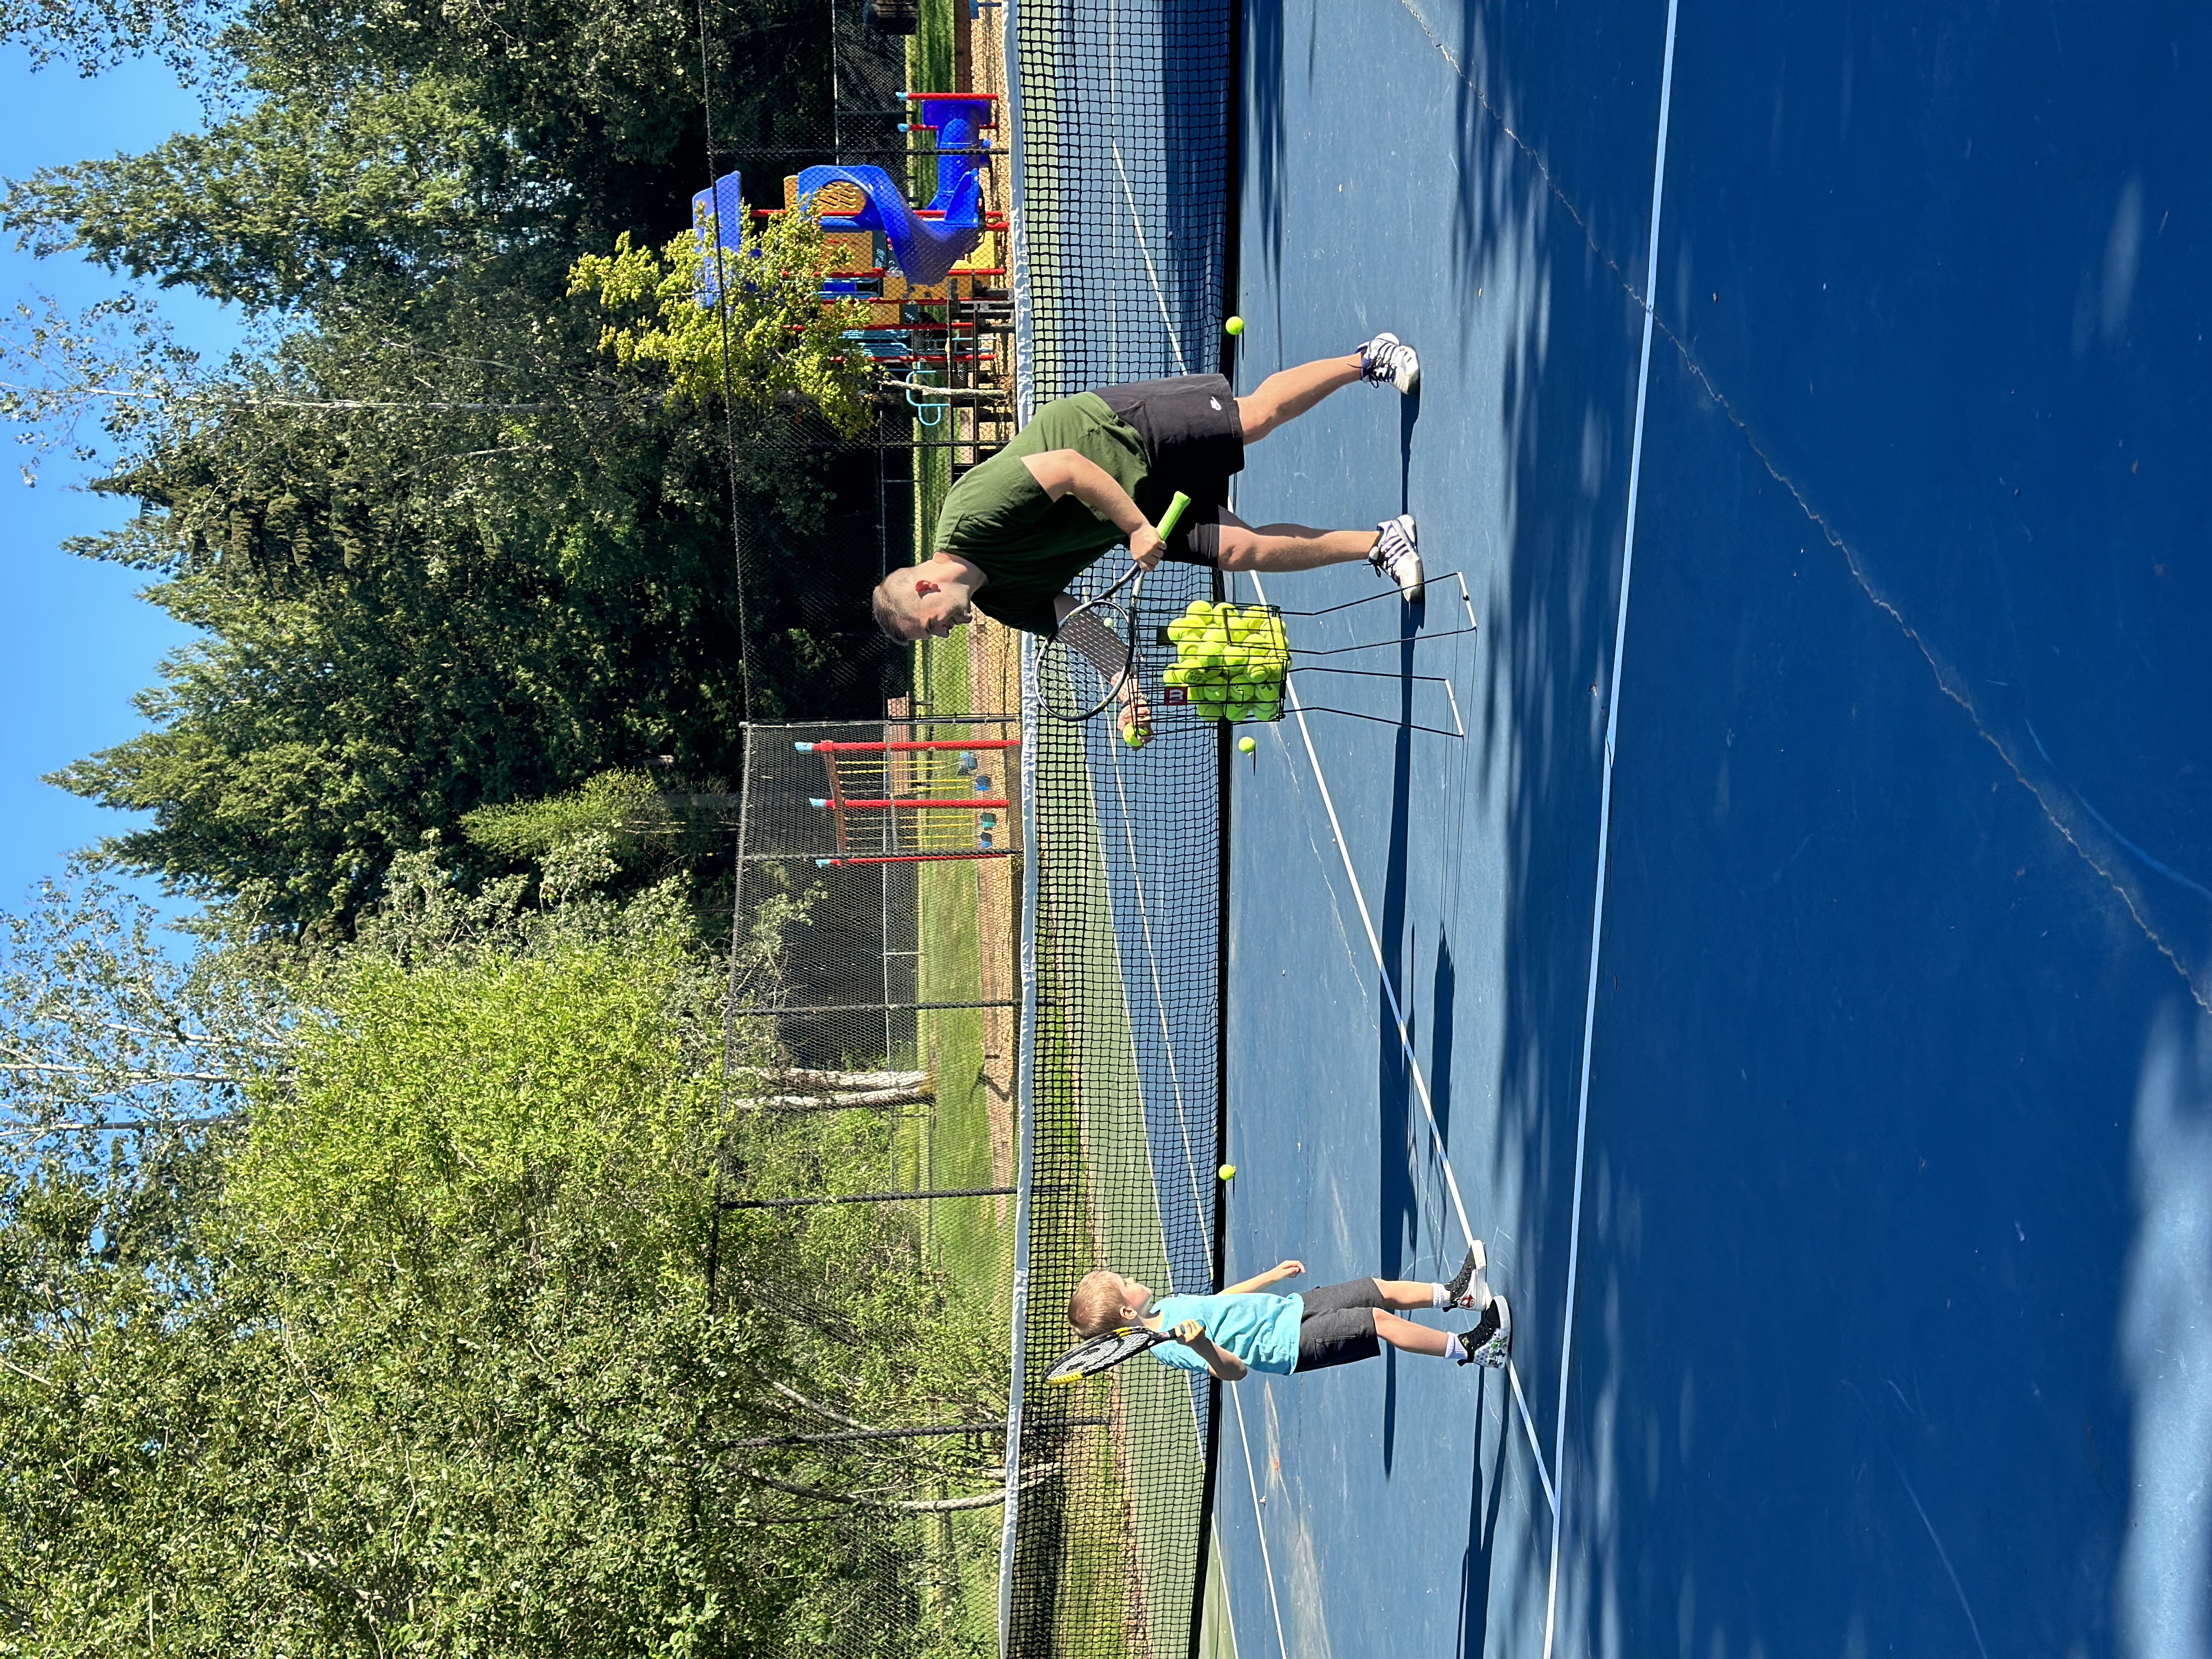 Patrick D. teaches tennis lessons in Bothell, WA